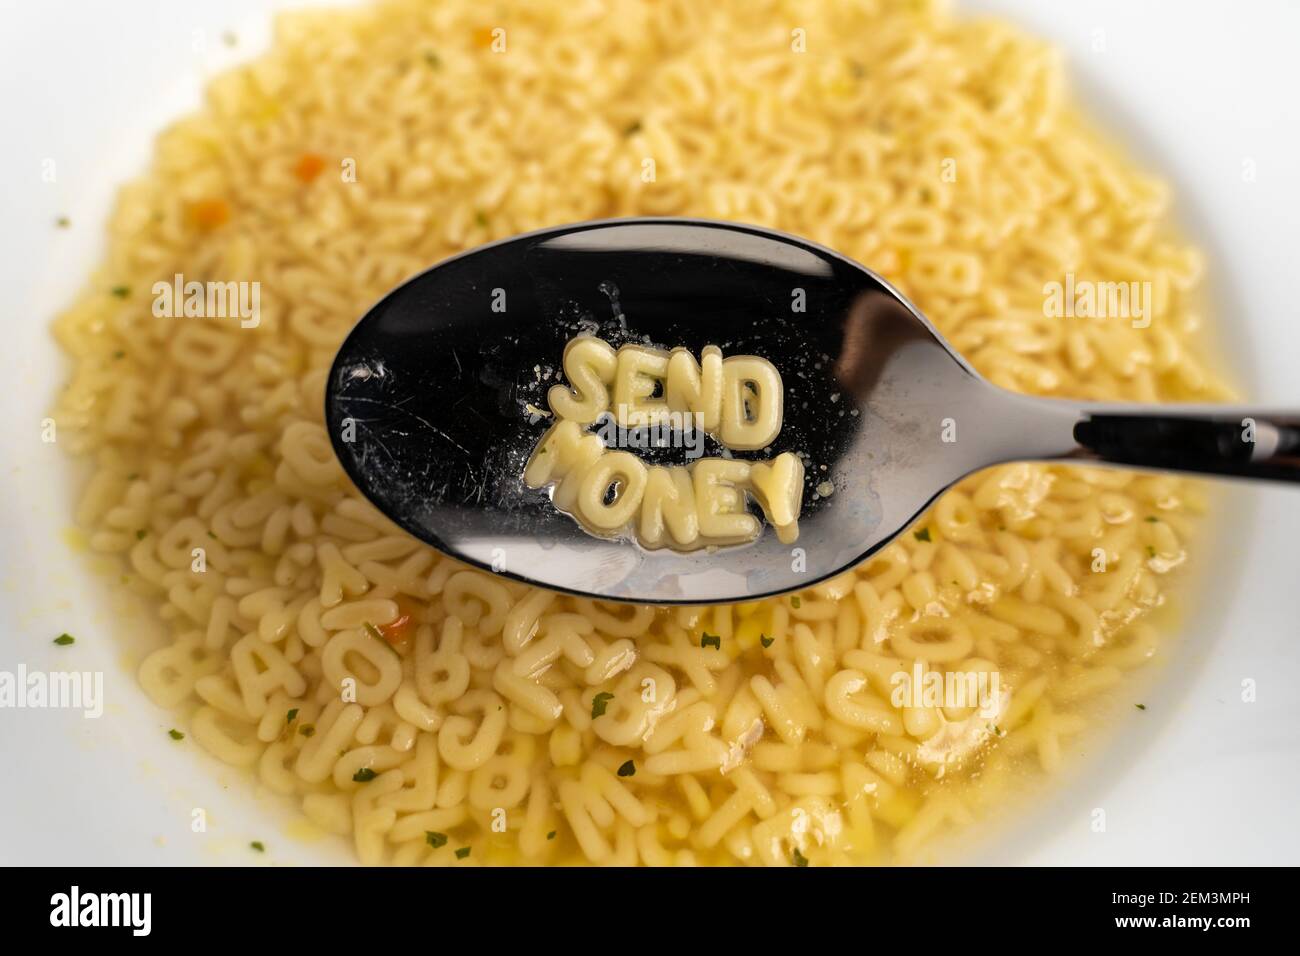 Alphabet soup letters with Send Money on the spoon, instant easy fast food because of poverty Stock Photo